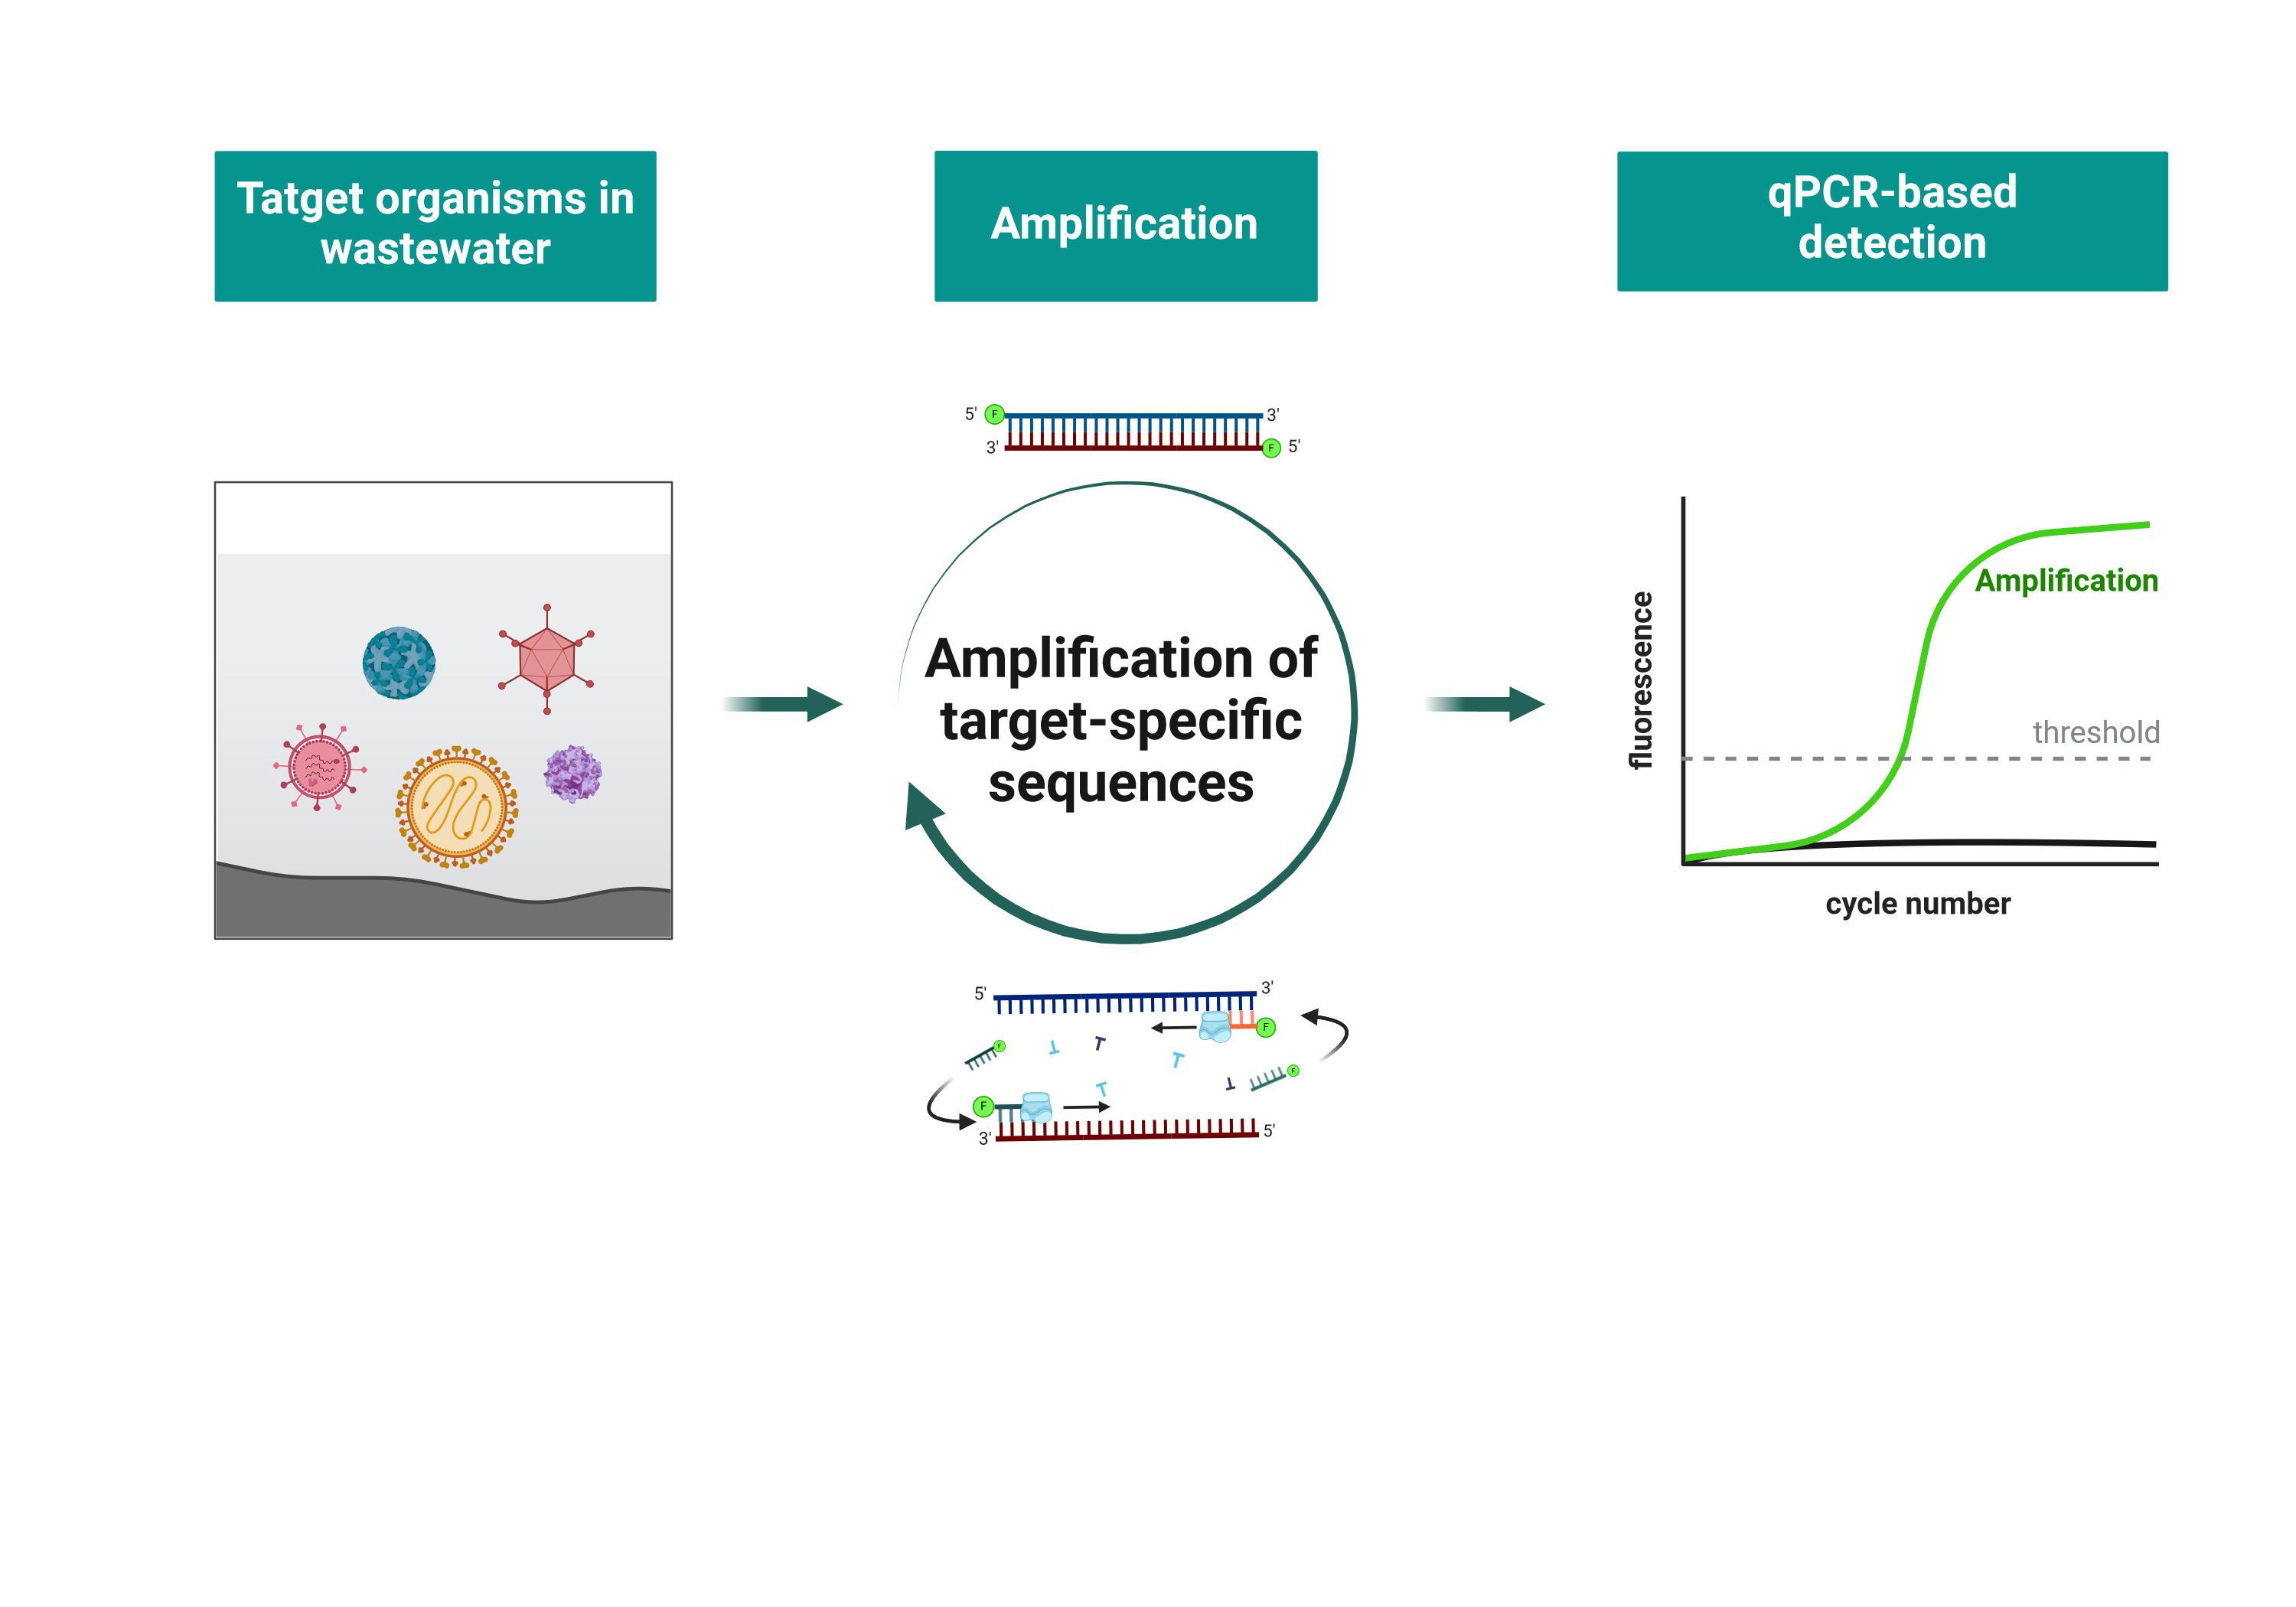 After isolating the target organisms from wastewater, their genomic material is amplified using specific probes. The subsequent qPCR allows the detection of existing viruses. 